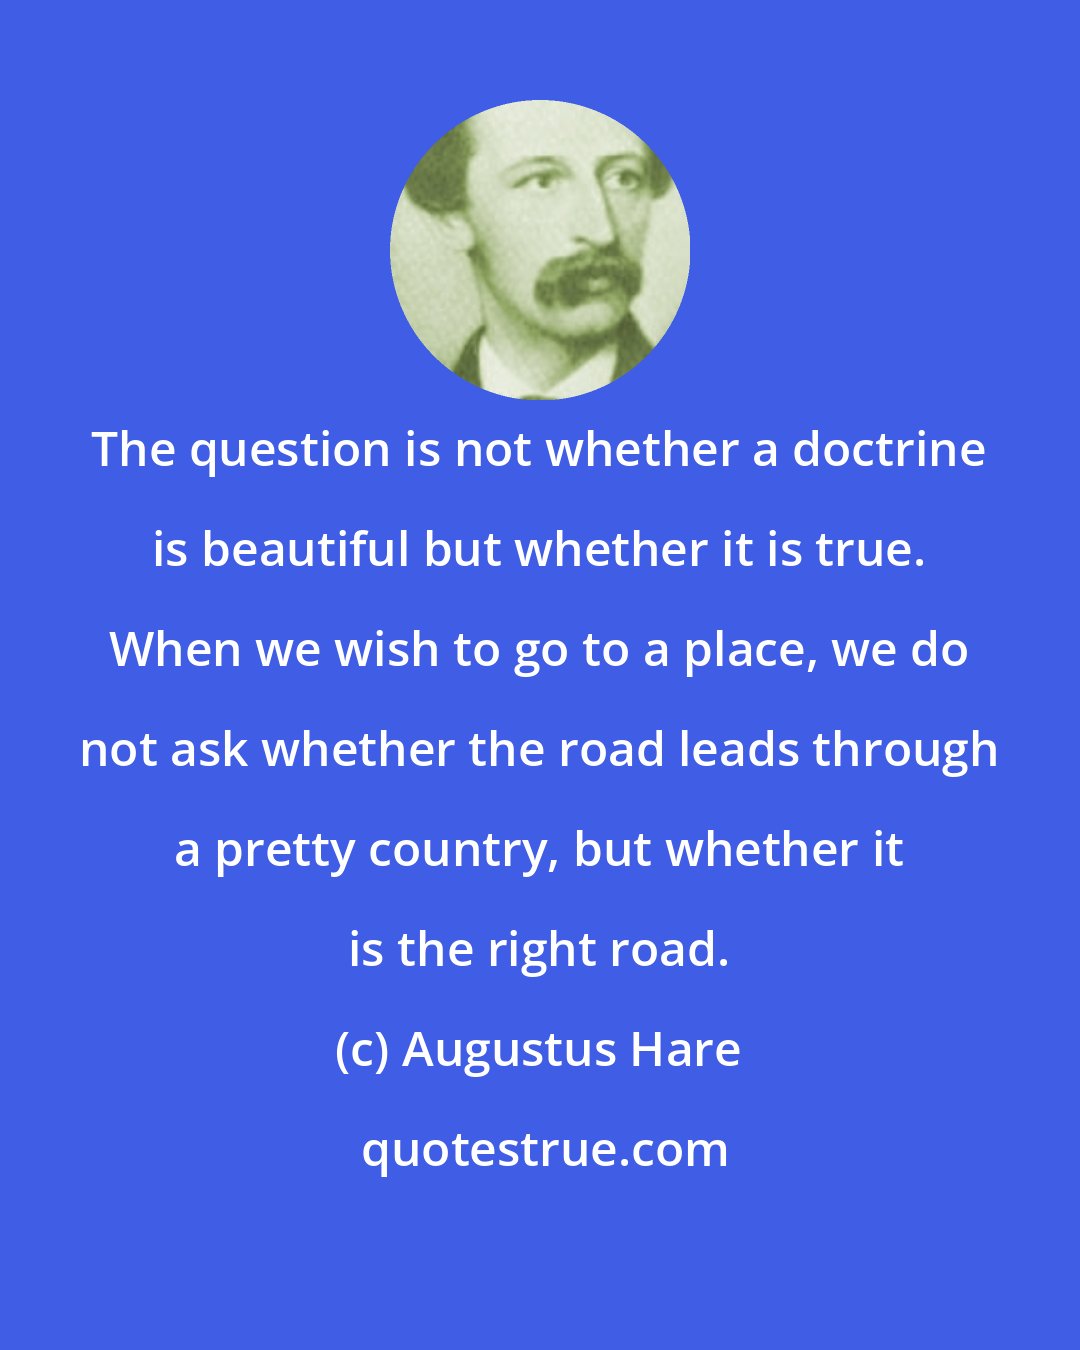 Augustus Hare: The question is not whether a doctrine is beautiful but whether it is true. When we wish to go to a place, we do not ask whether the road leads through a pretty country, but whether it is the right road.